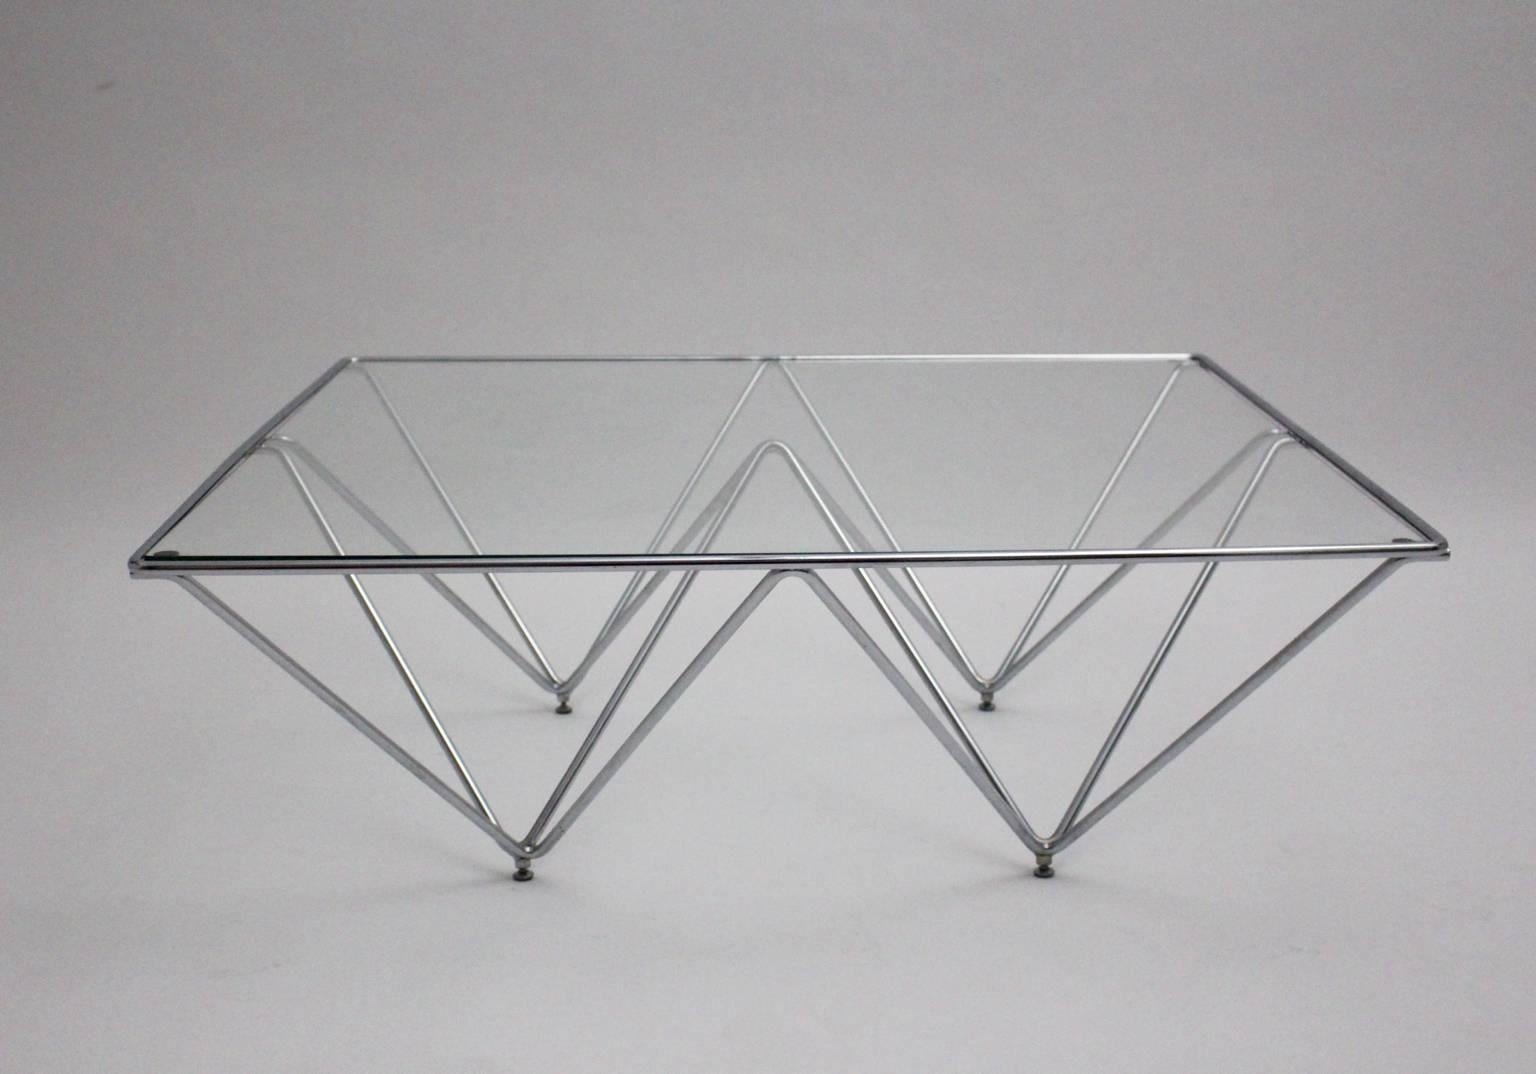 Modern vintage coffee table or sofa table Paolo Piva style from chromed tube steel and clear glass. 
The sofa table is very similar to Paolo Piva and shows a square chromed tube steel frame with a clear glass plate.
Good condition with signs of age